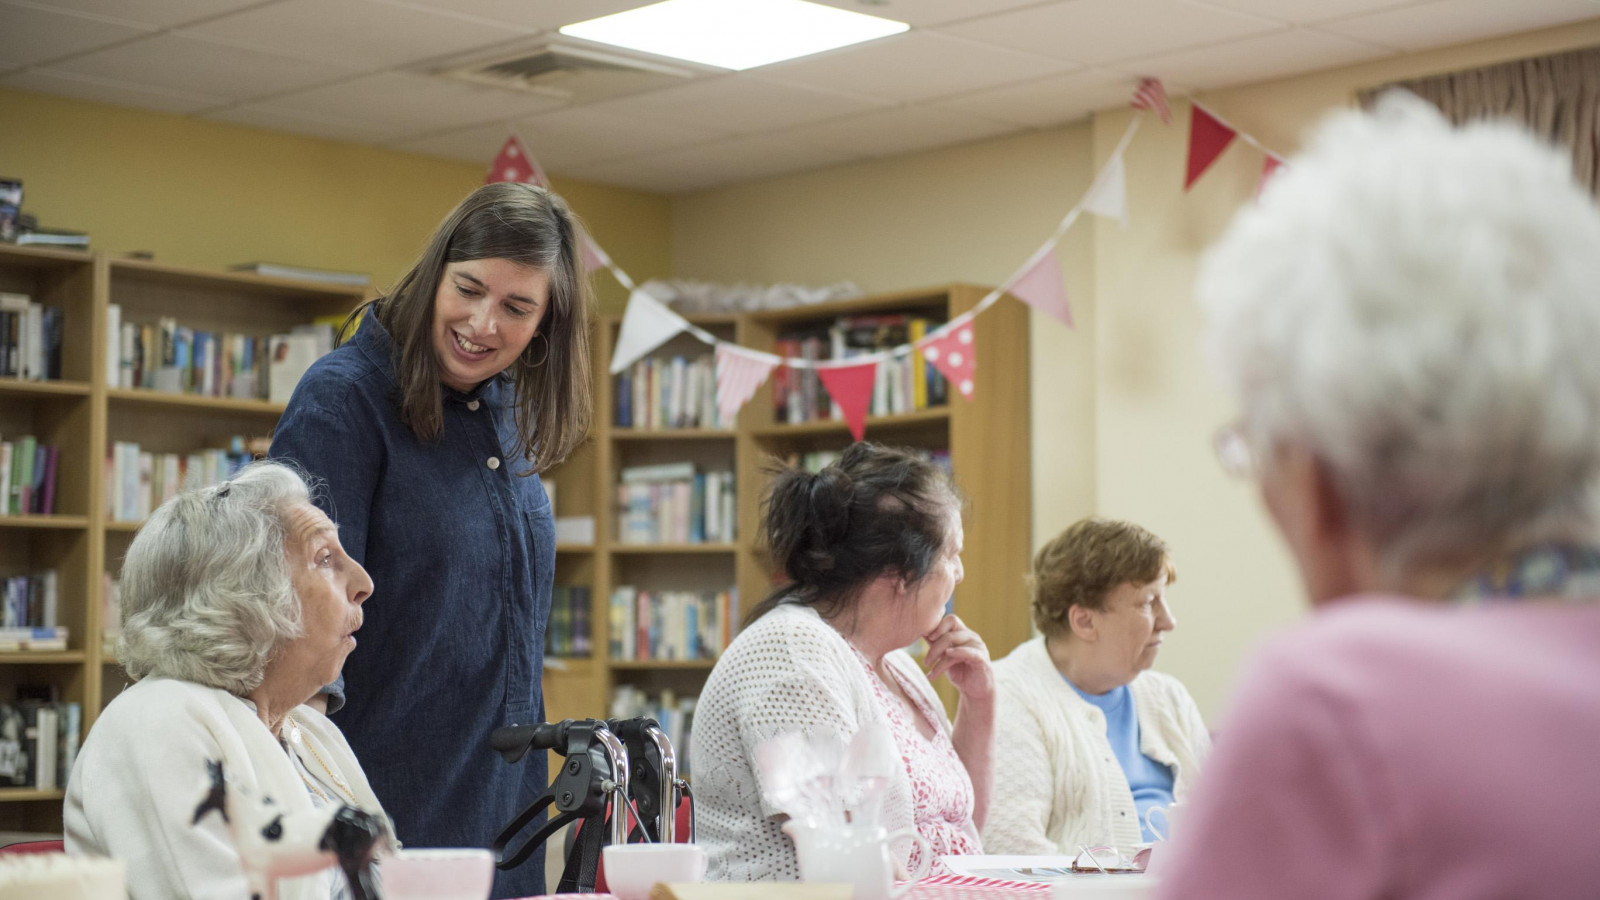 Sheila Ghelani stands at a table decorated with table cloths and teacups. In the background is some red and white bunting. Sheila is smiling and talking to an older woman who is sat at the table. People sit around the table and chat.